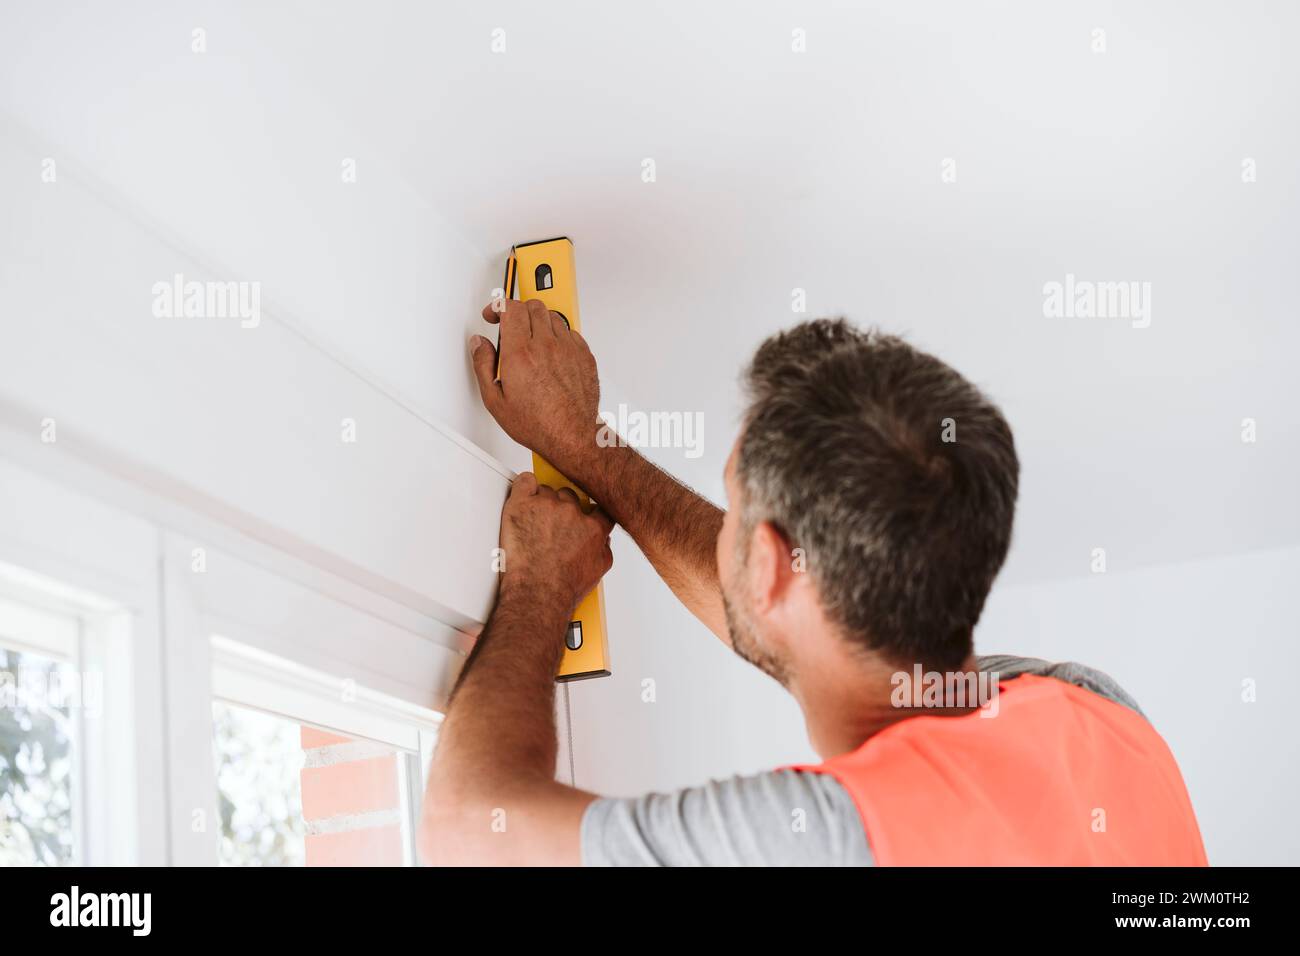 Repairman using leveling tool at house under renovation Stock Photo